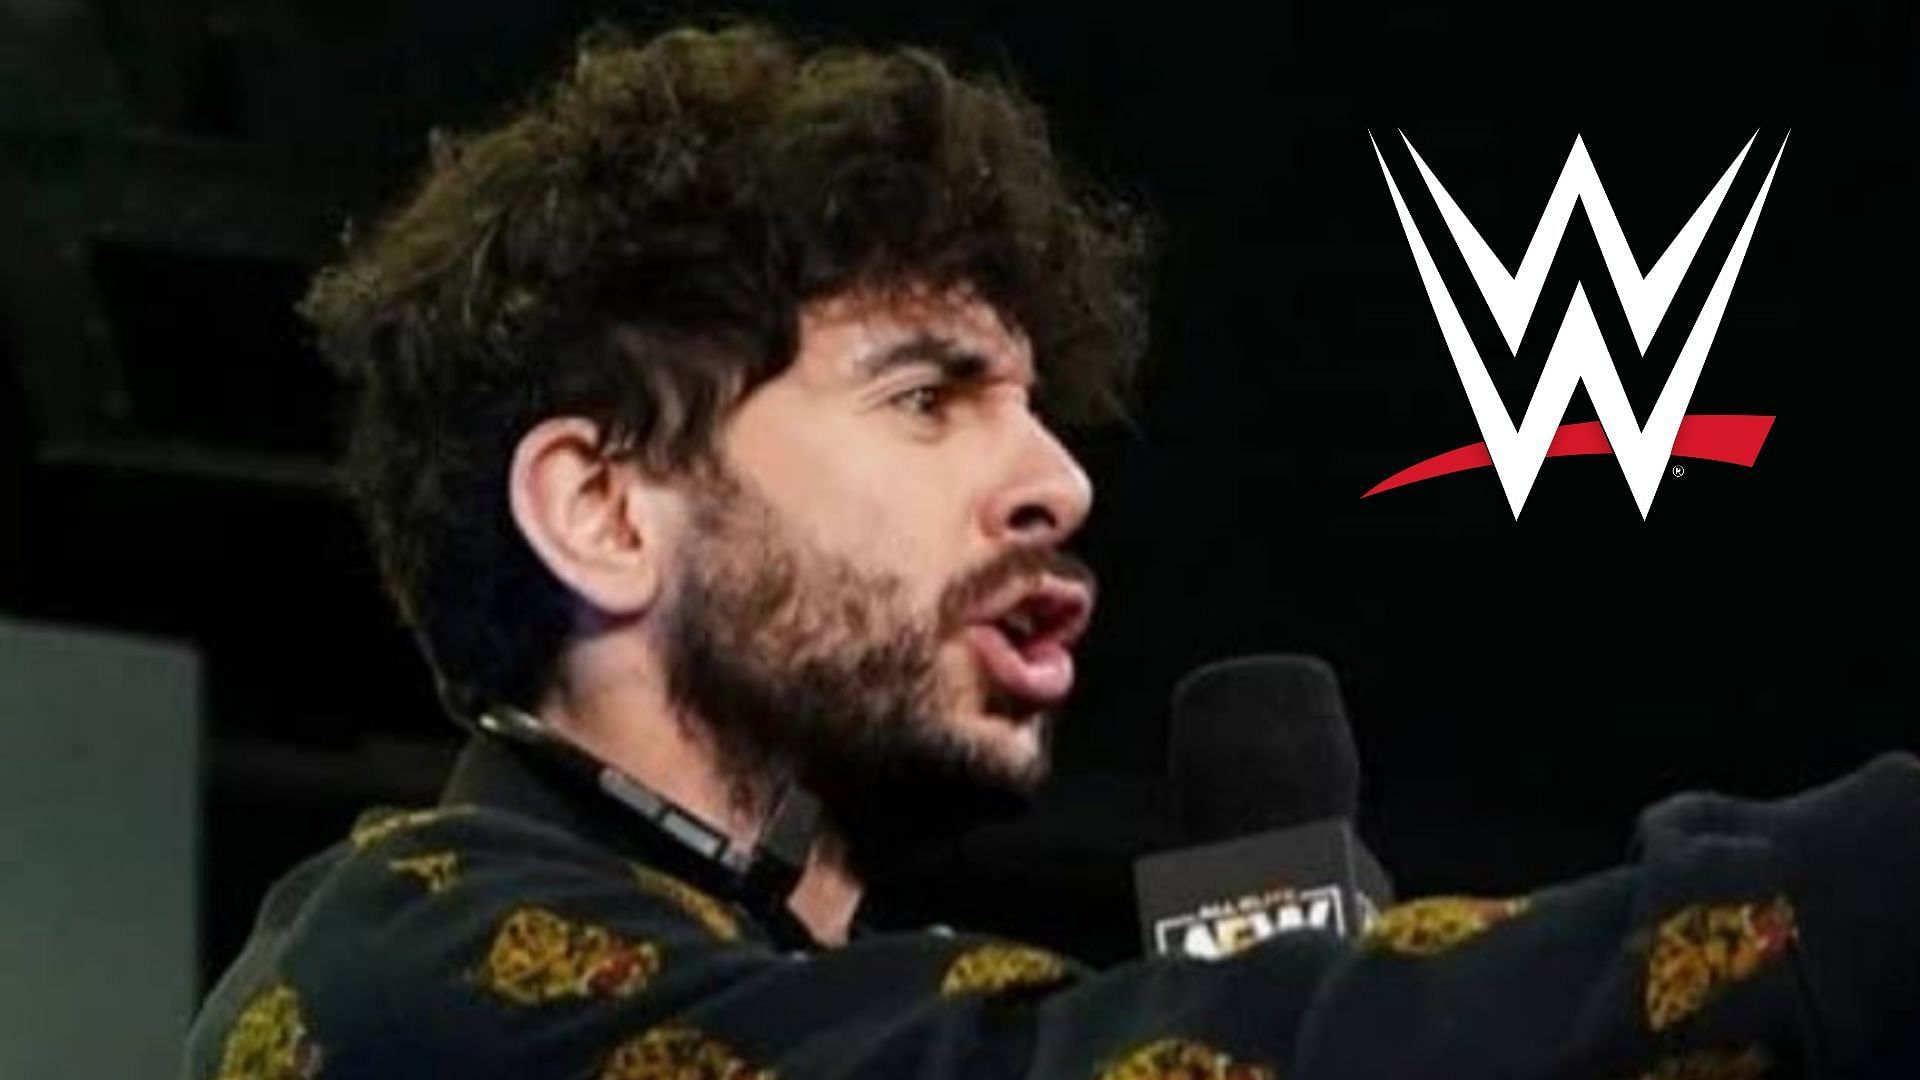 Tony Khan recently hired a WWE Hall of Famer